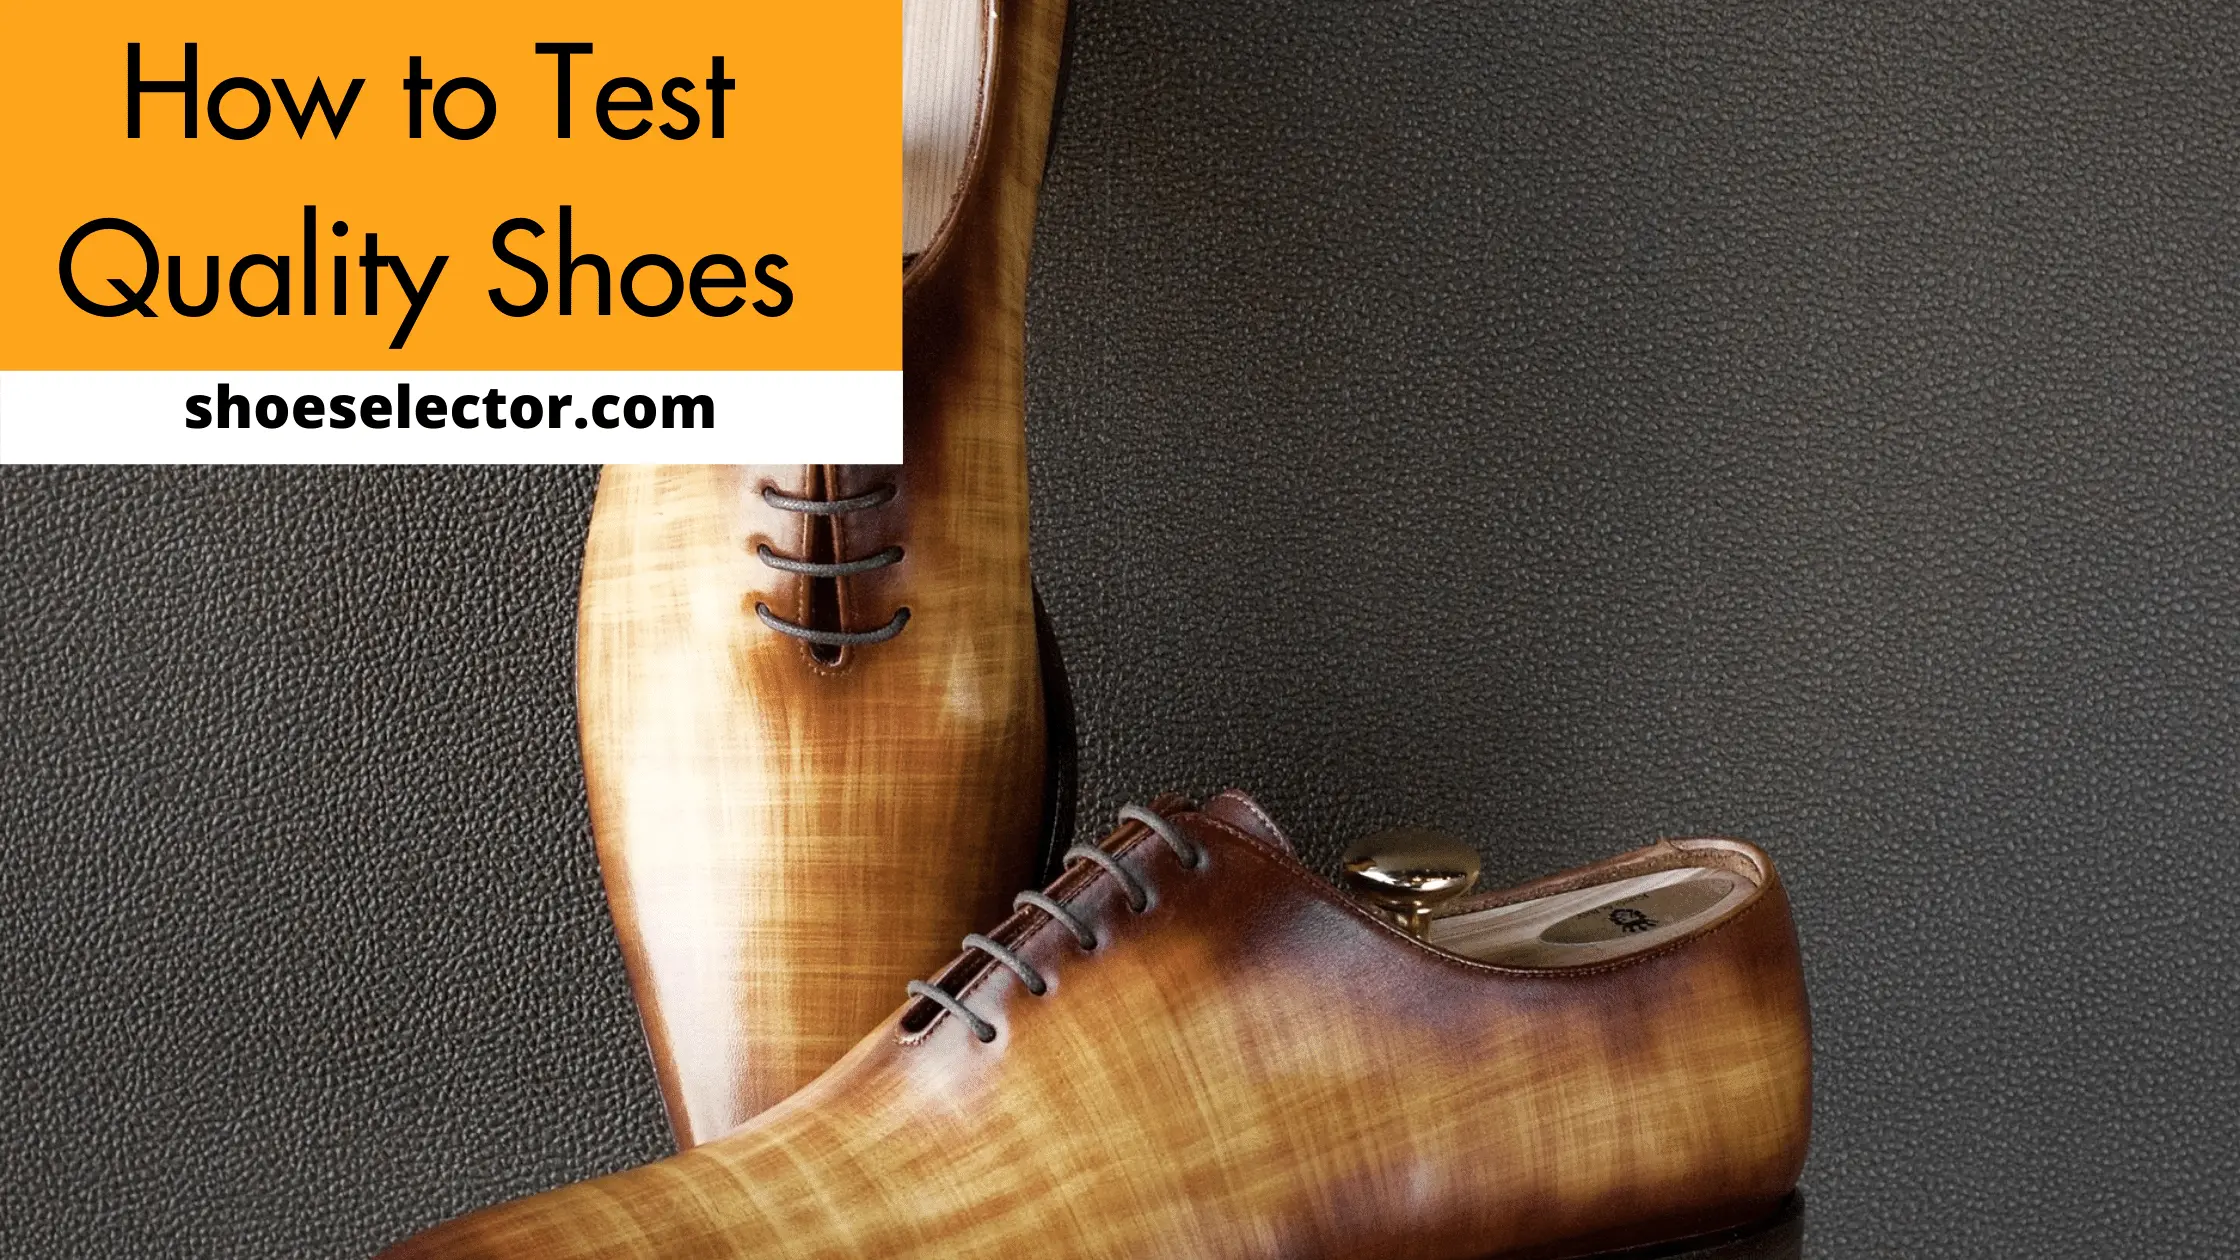 How to Test Quality Shoes? - Comprehensive Guide